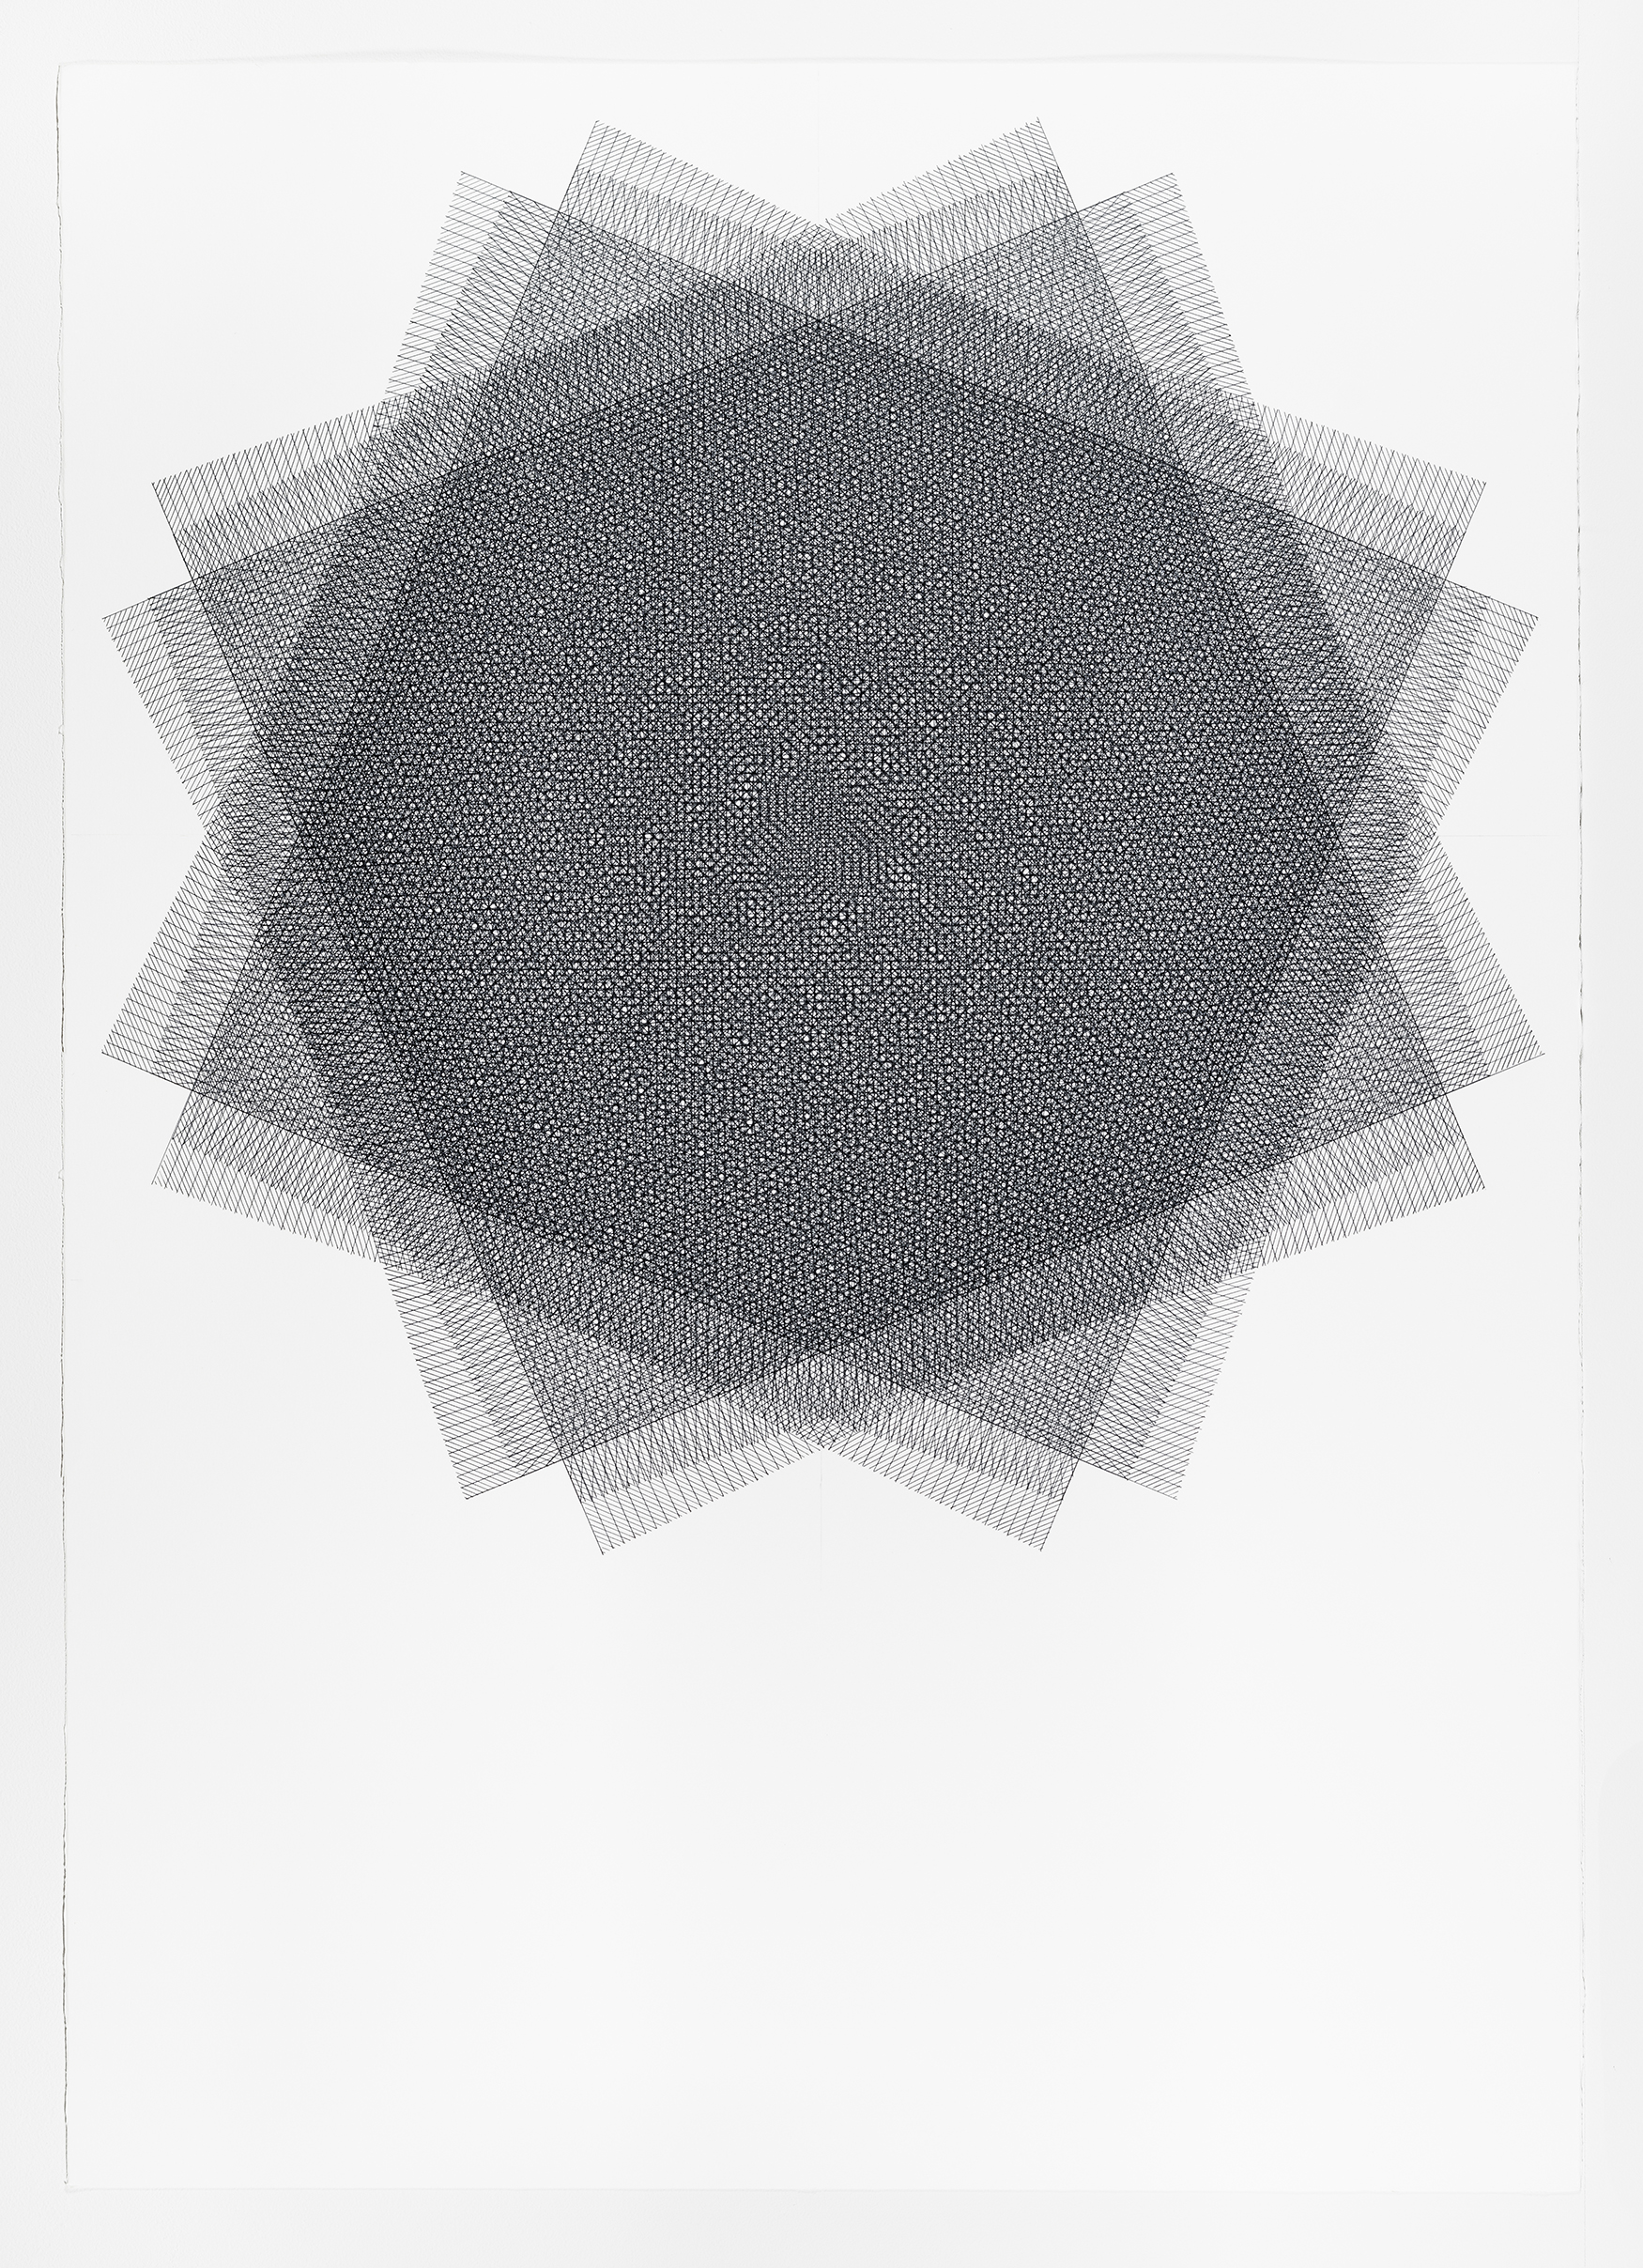 16 layers rotated 22.5 degrees, grey, 40 x 30 inches, 2015